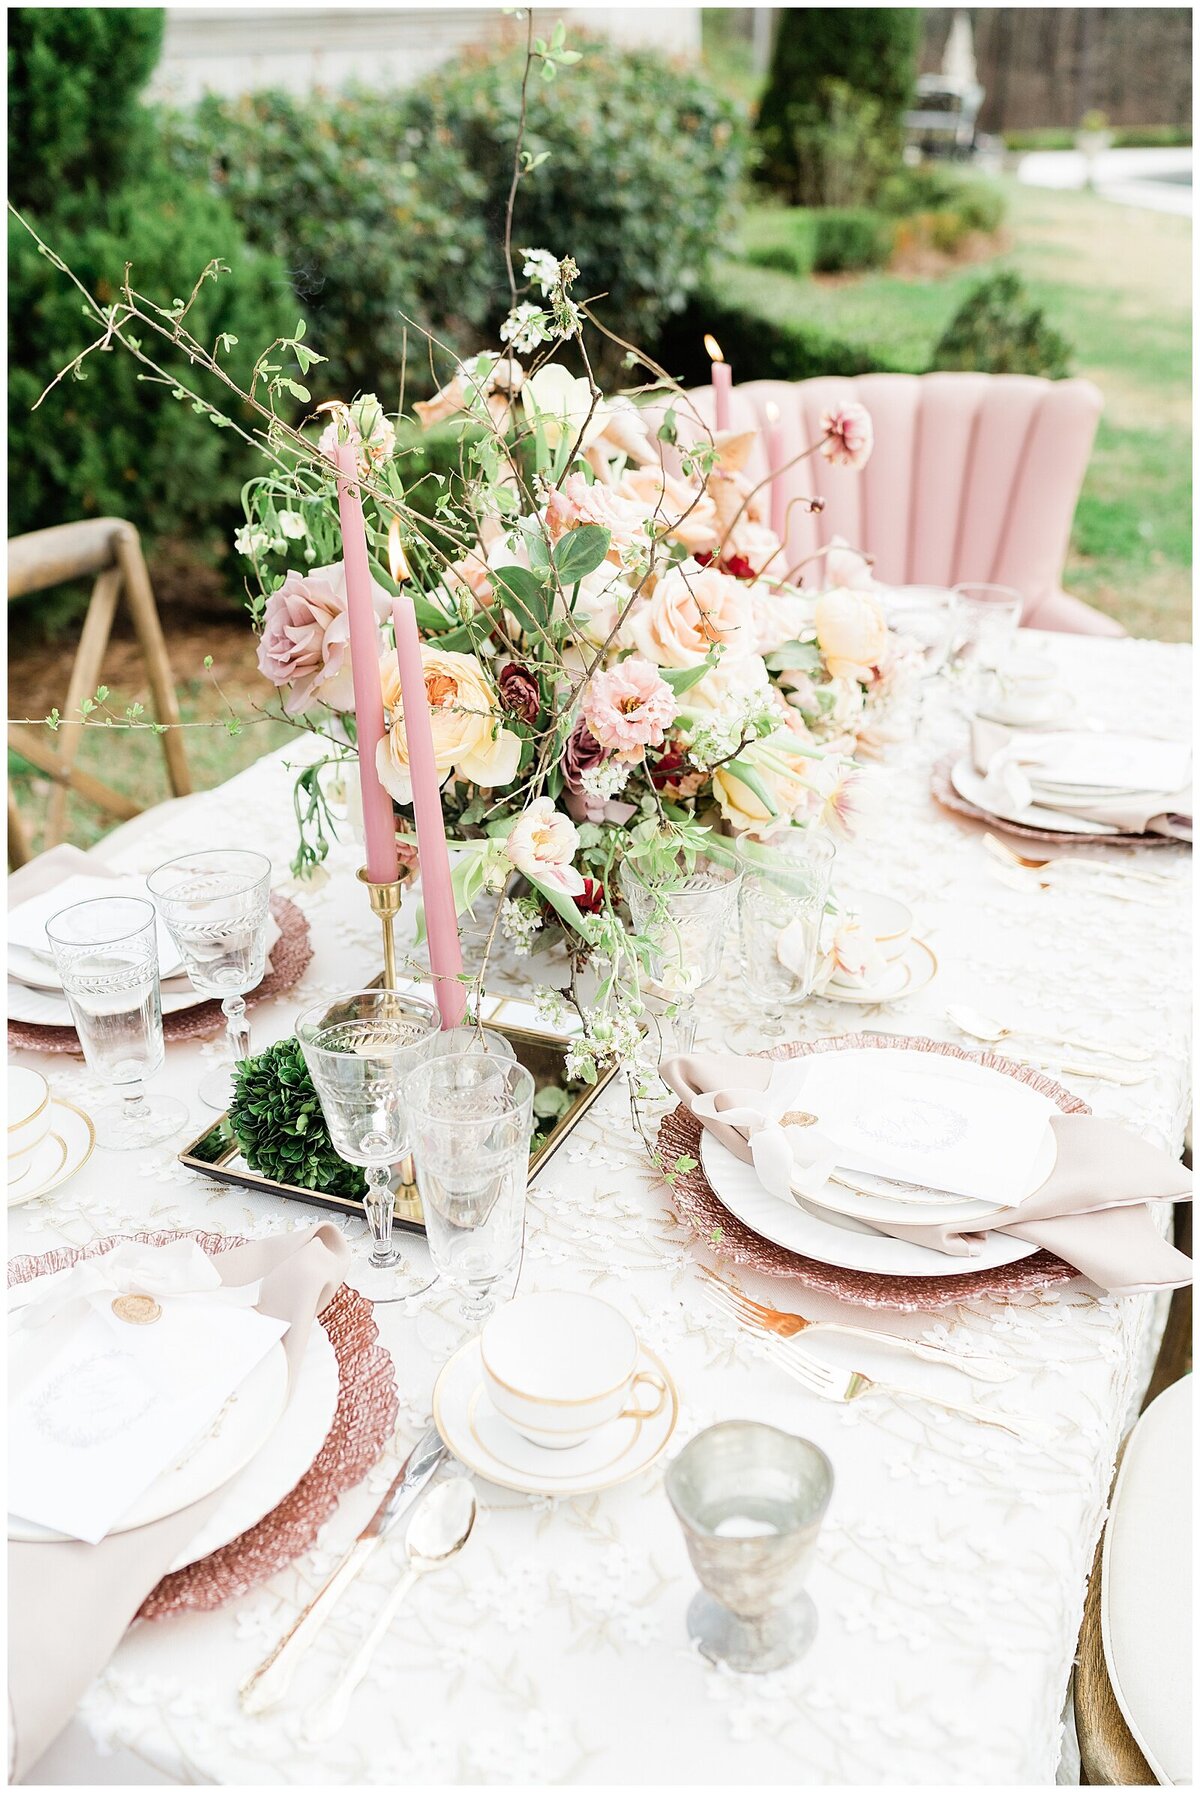 Wedding place setting with pink accents